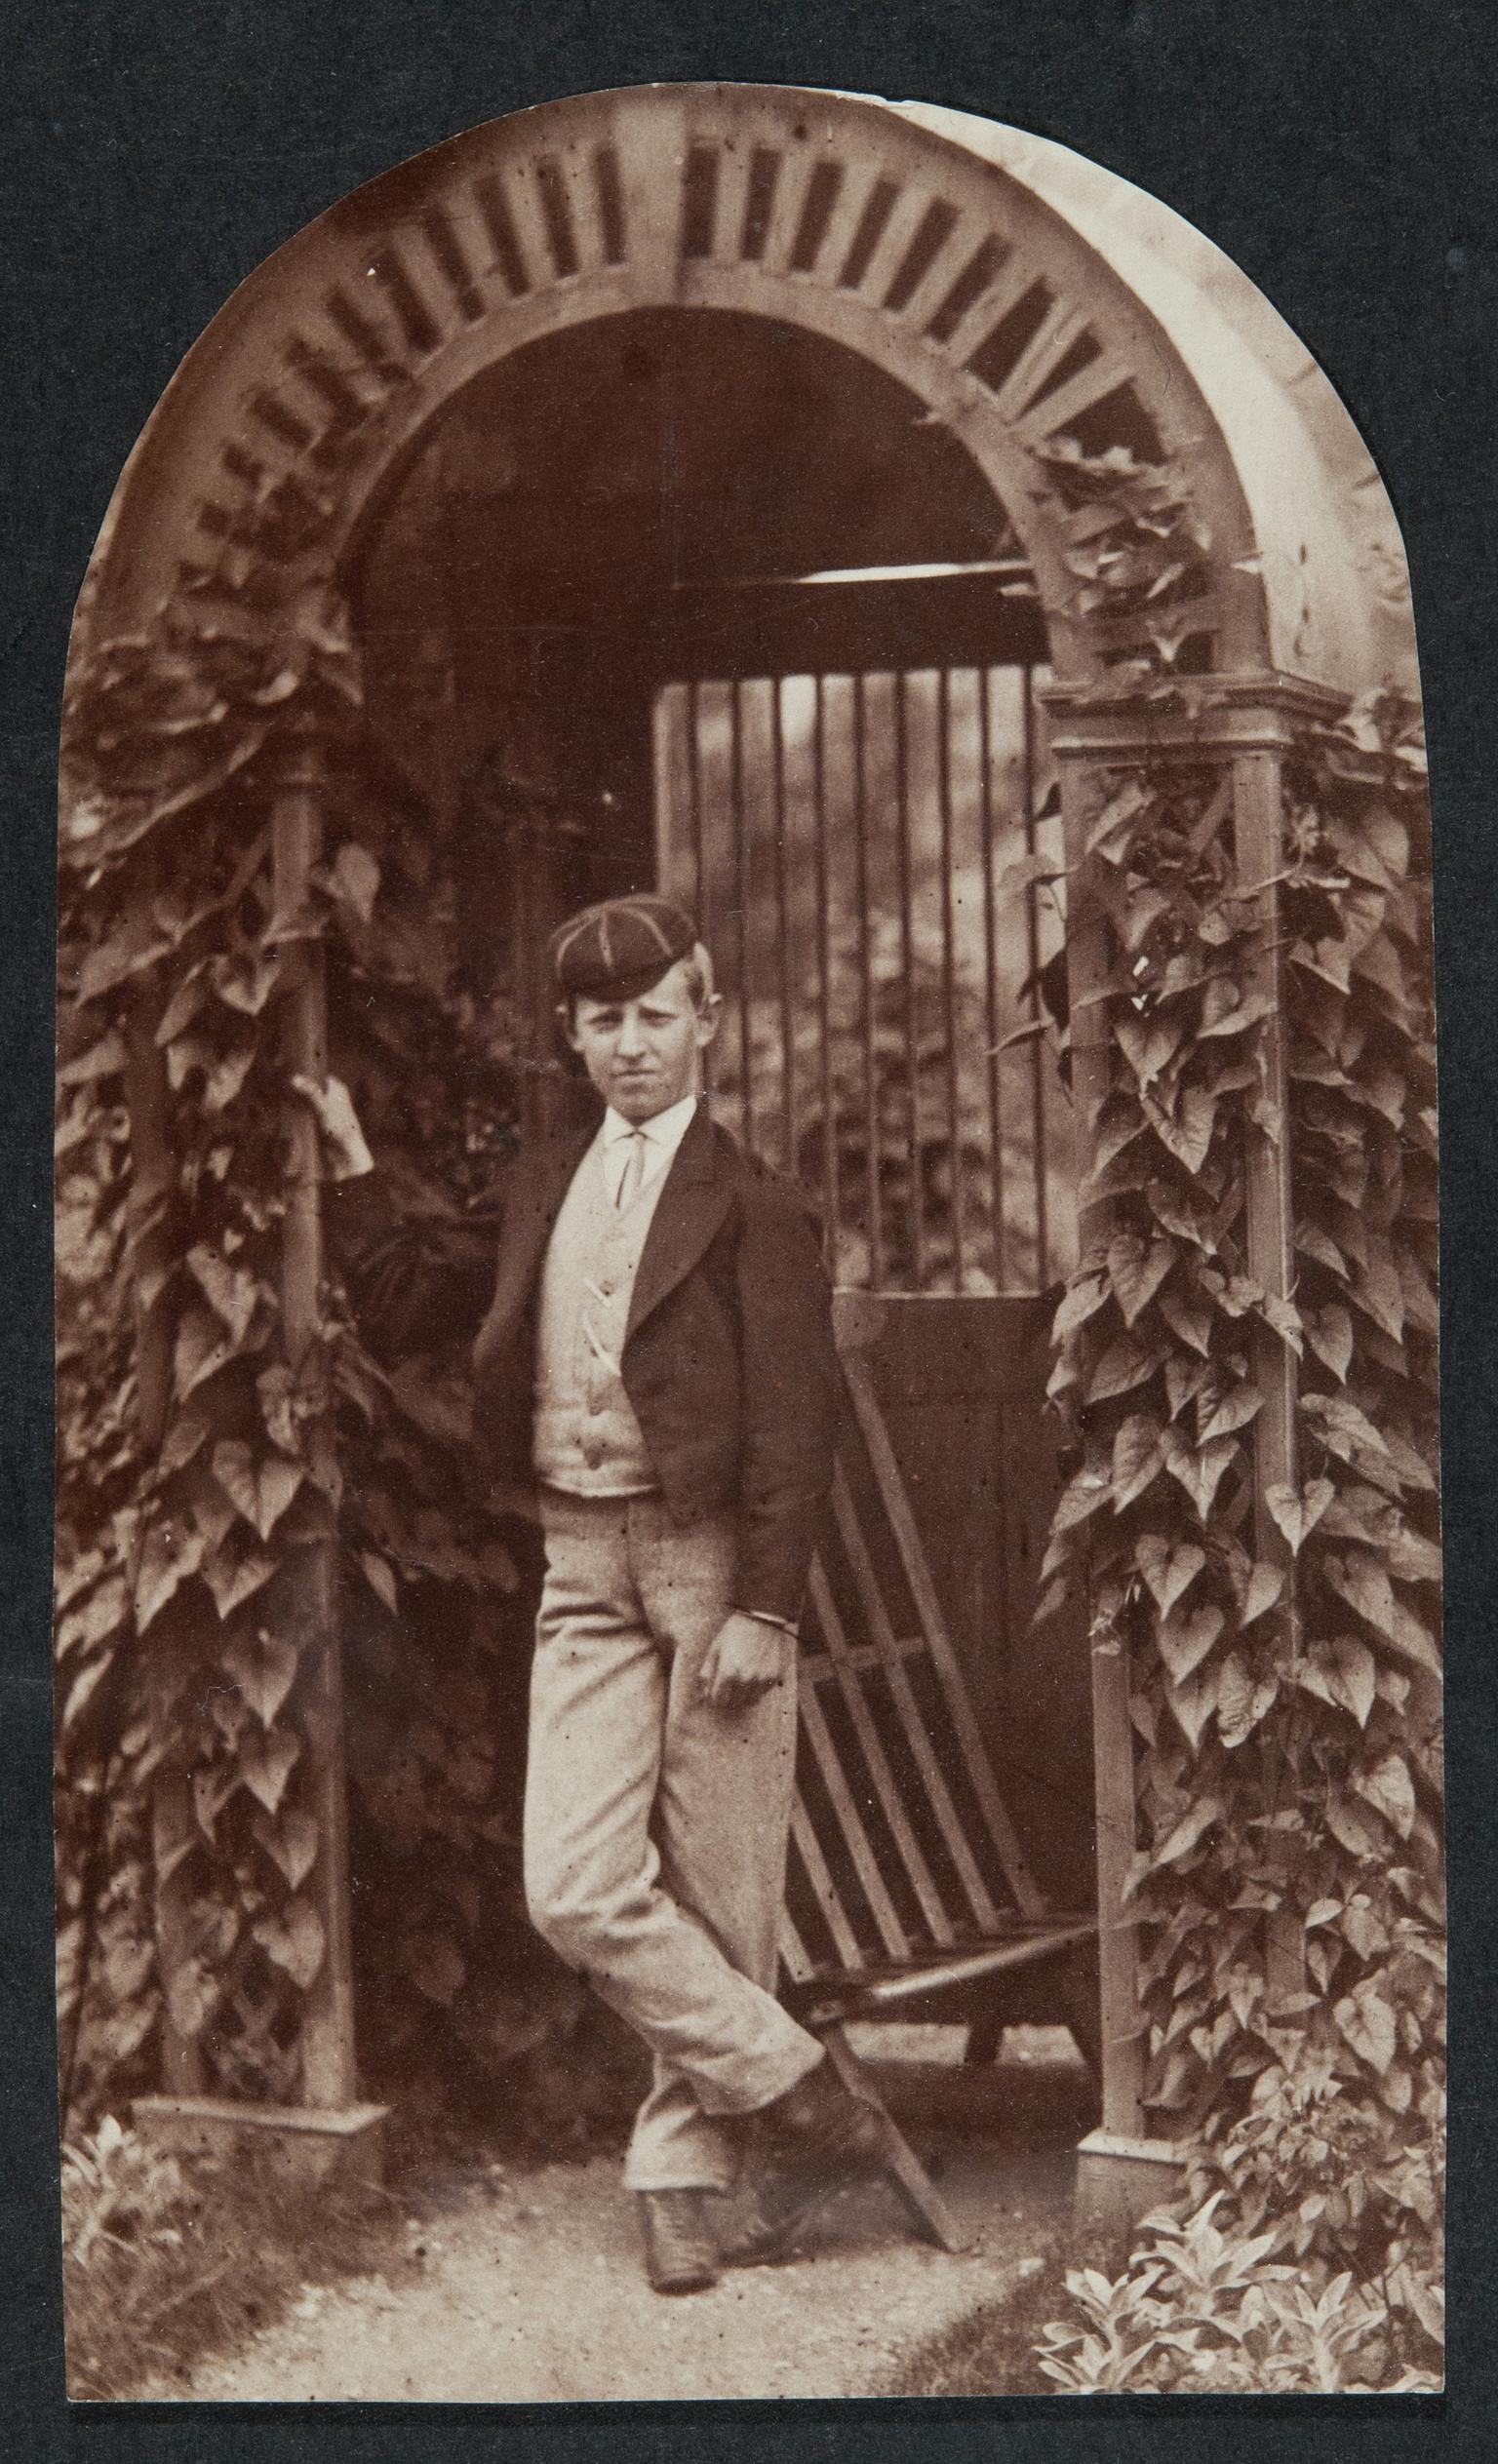 Boy in archway, photograph